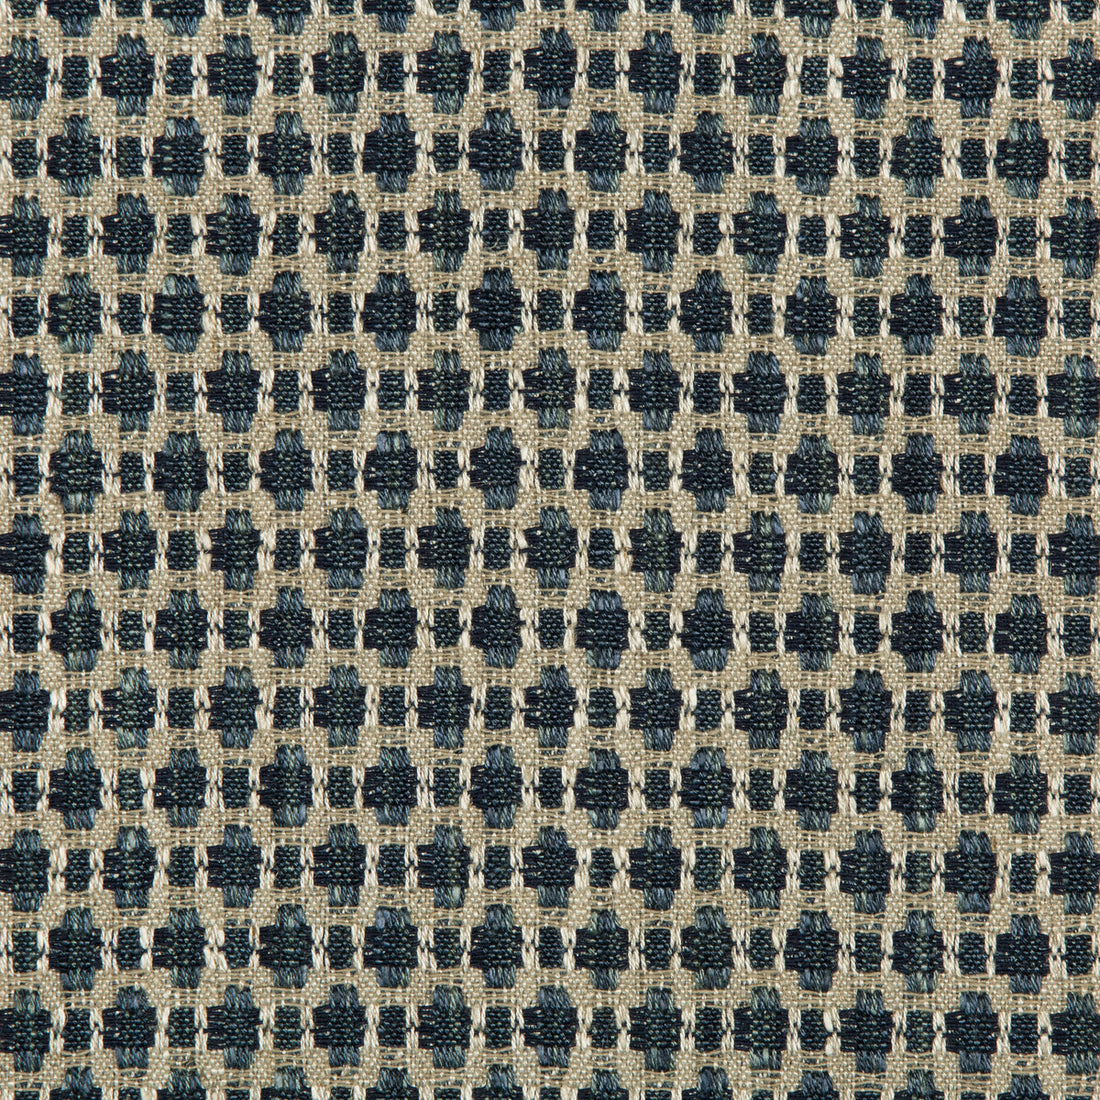 Kravet Design fabric in 35622-50 color - pattern 35622.50.0 - by Kravet Design in the Woven Colors collection